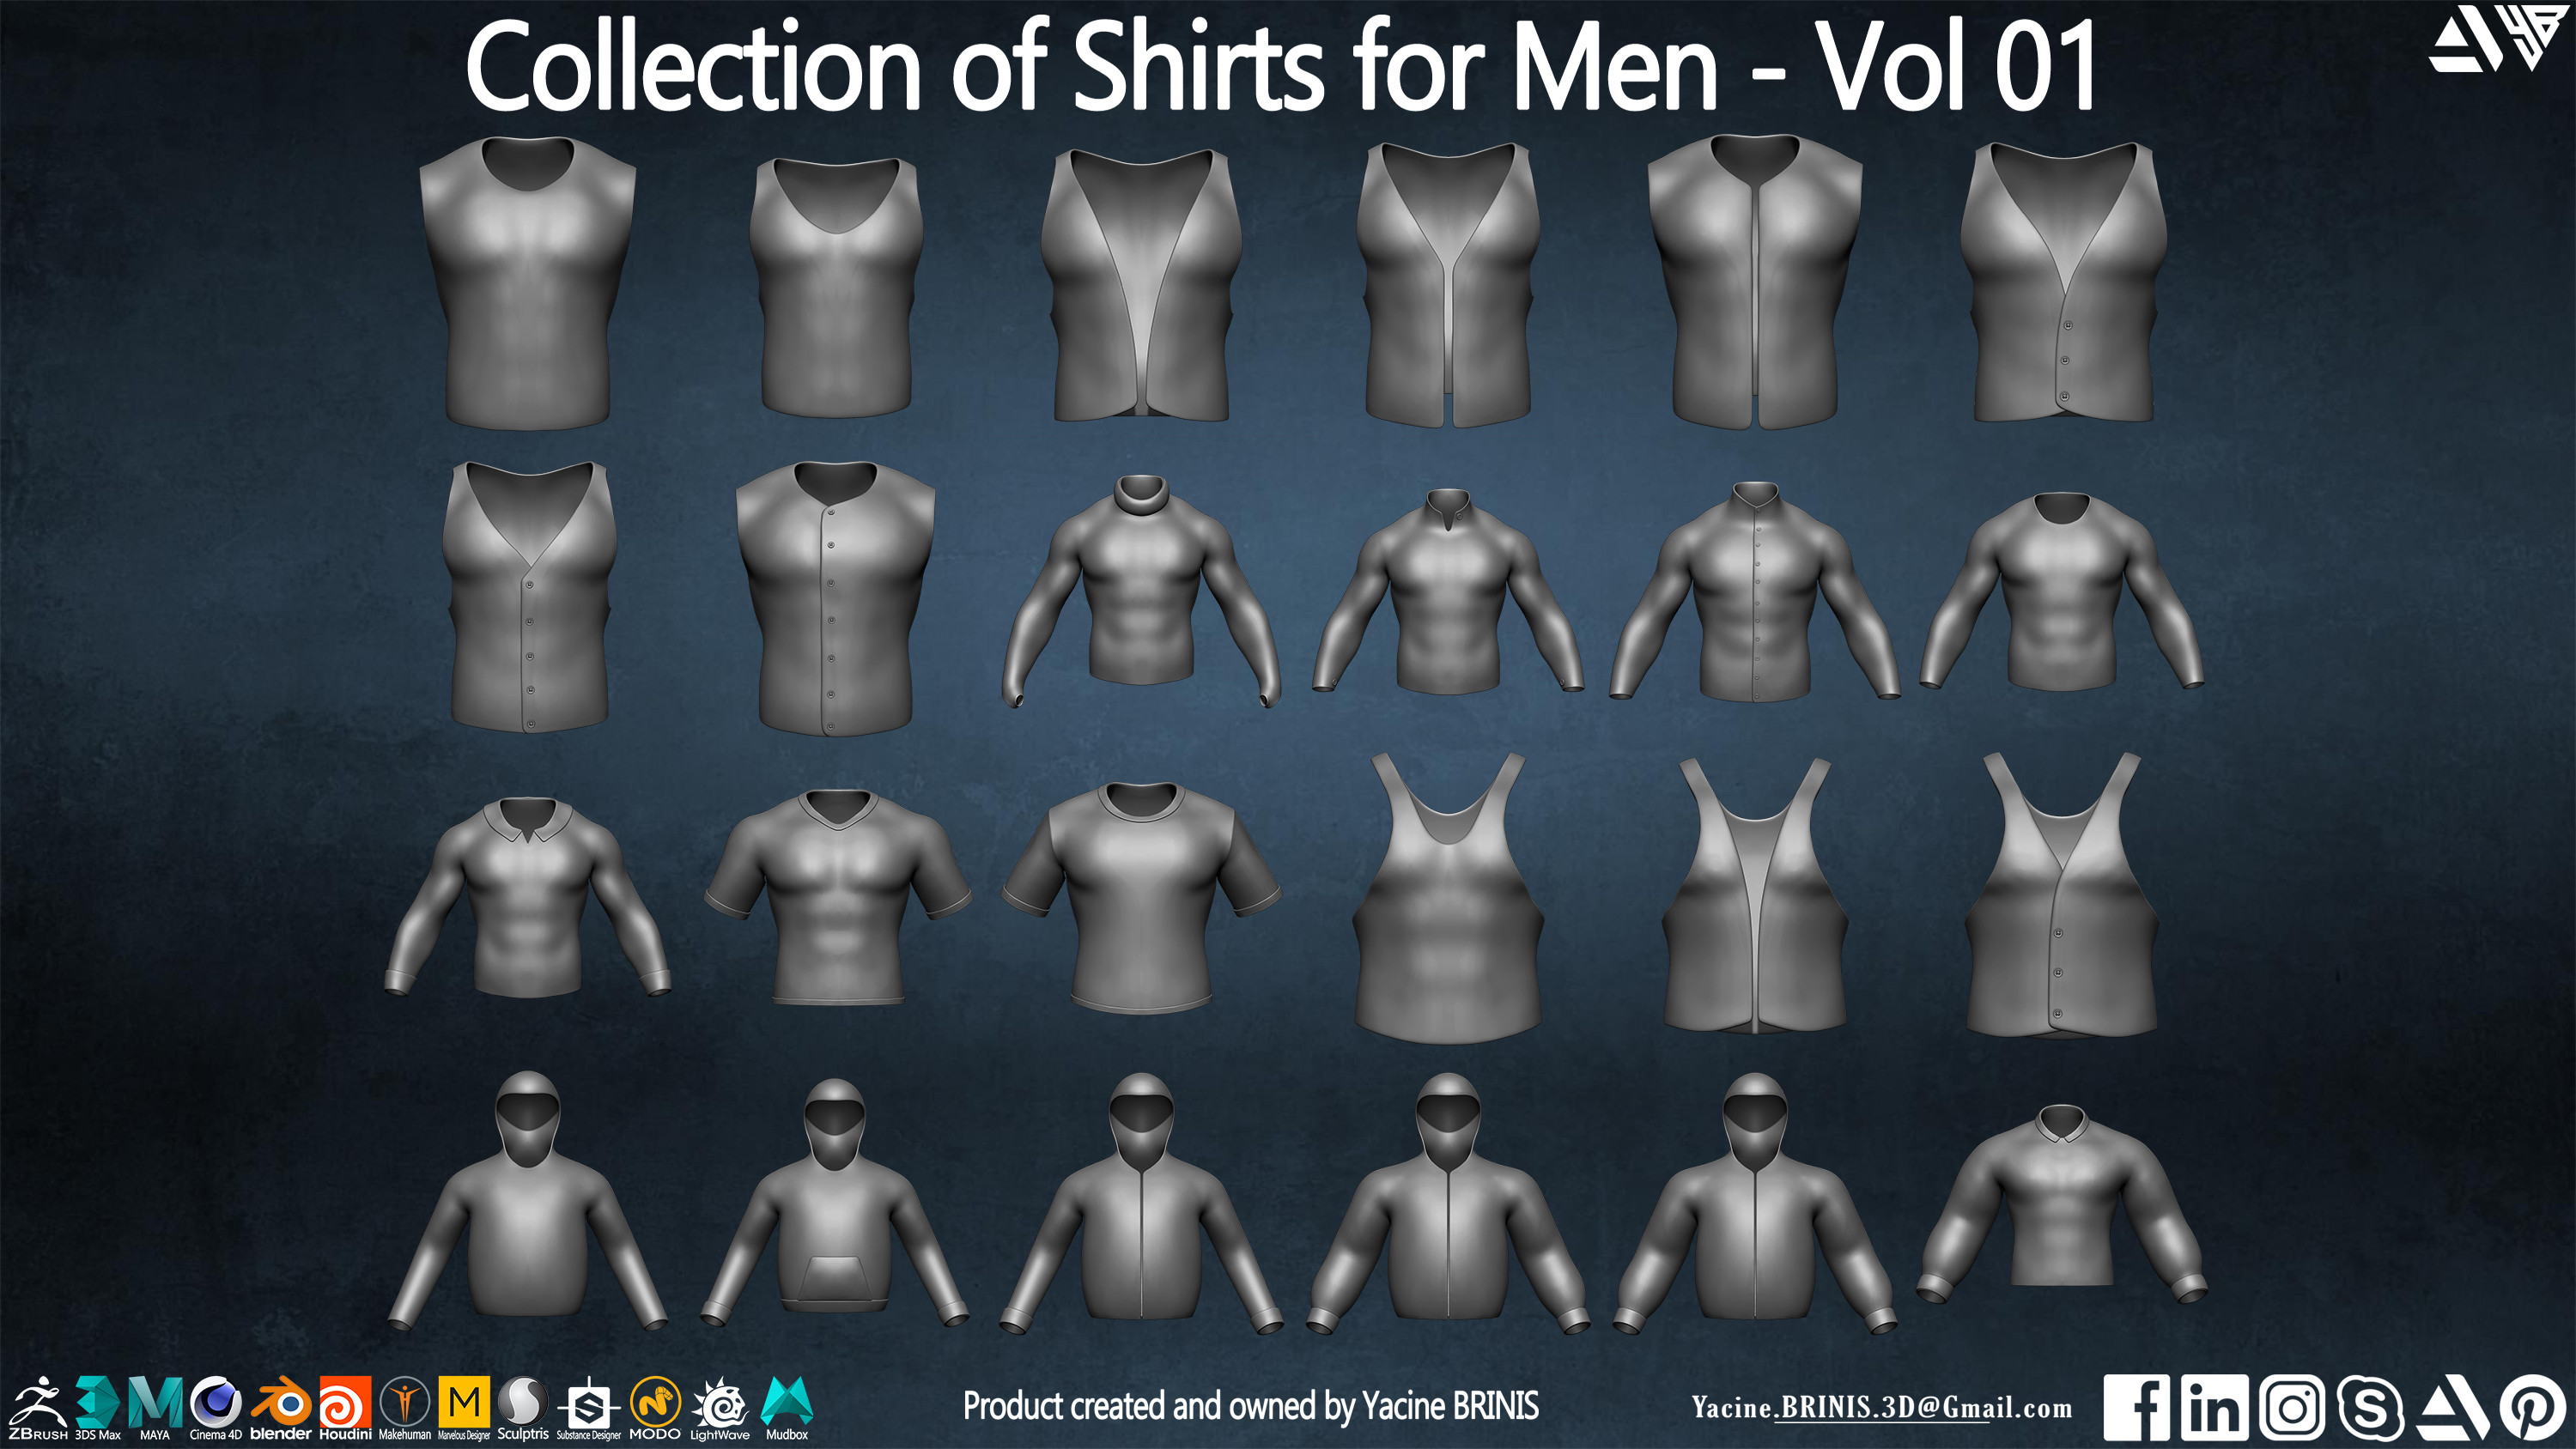 Collection of Shirts for Men - Volume 01 By Yacine BRINIS - 005